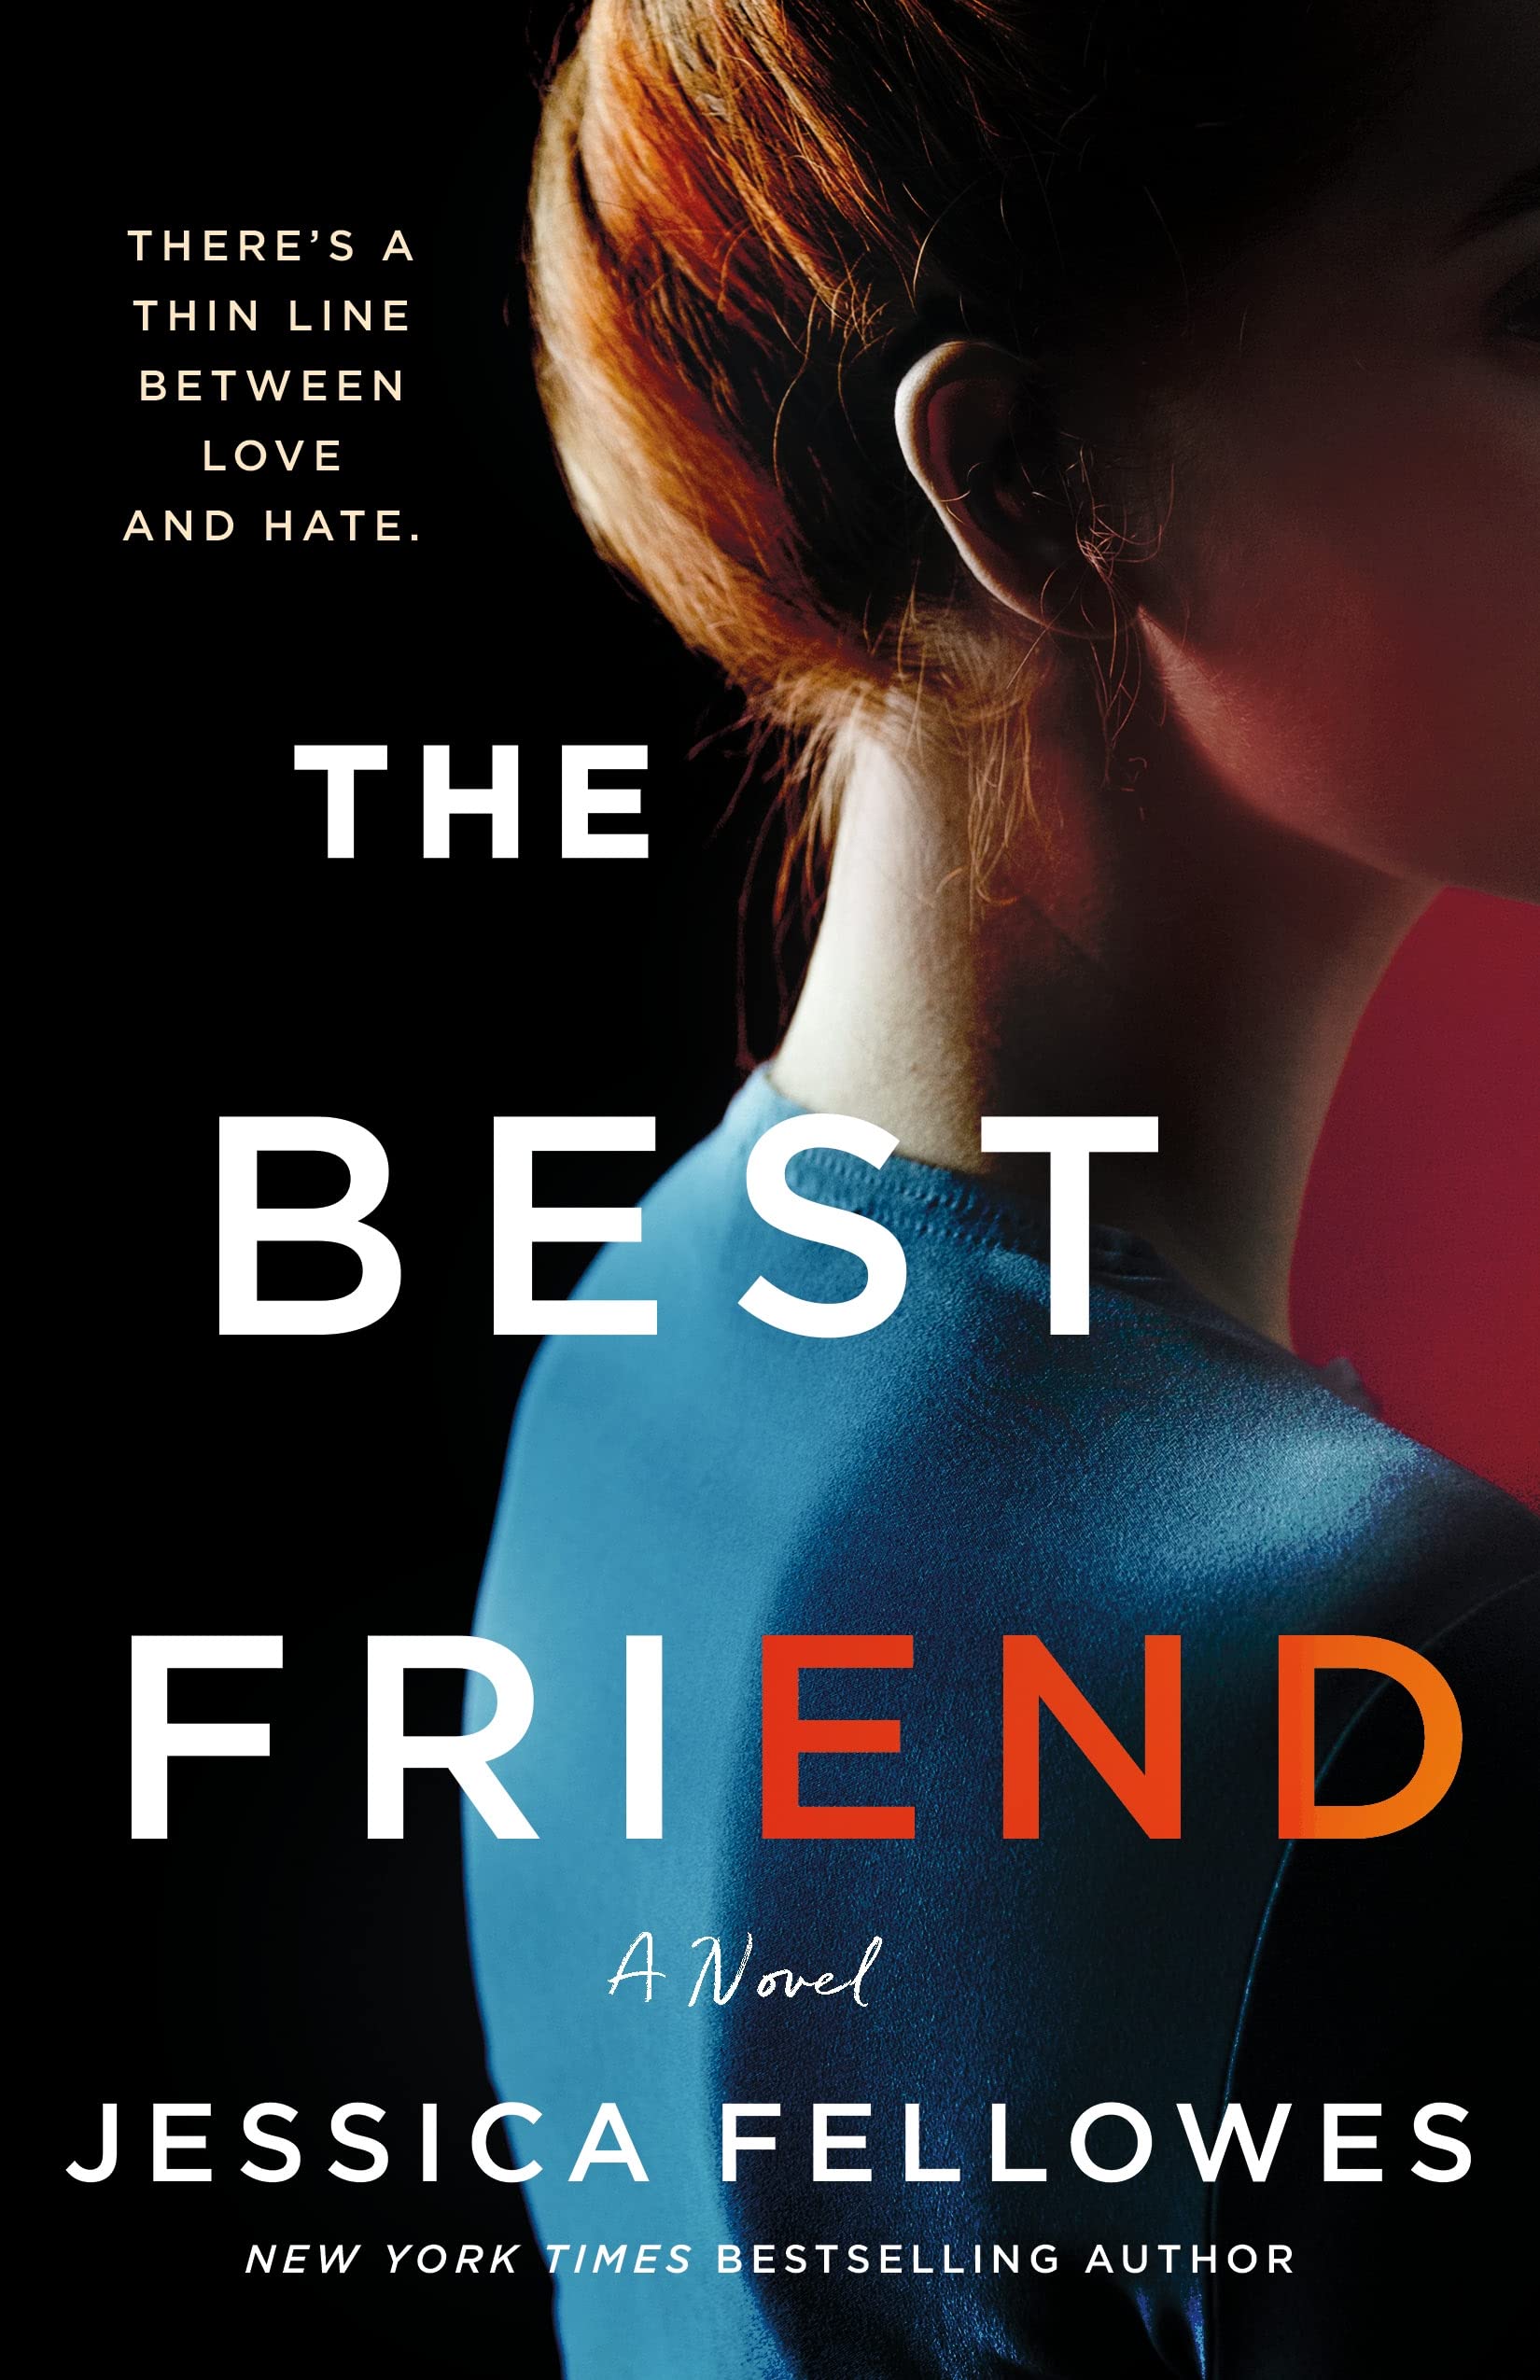 Image for "The Best Friend"